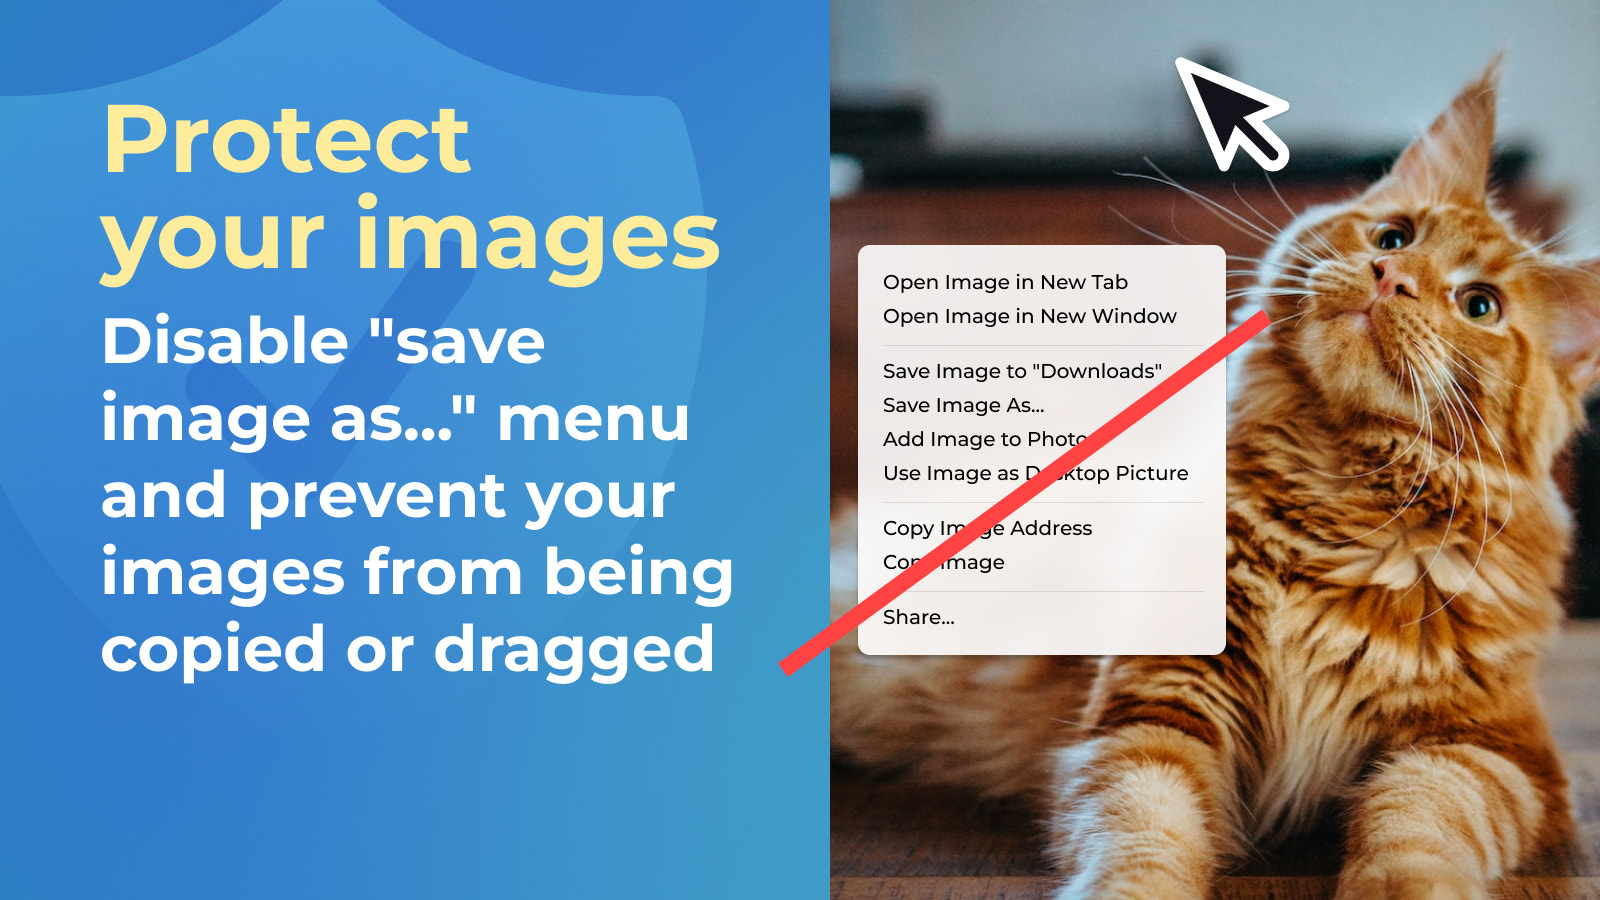 Protect your images: Disable save image as and more